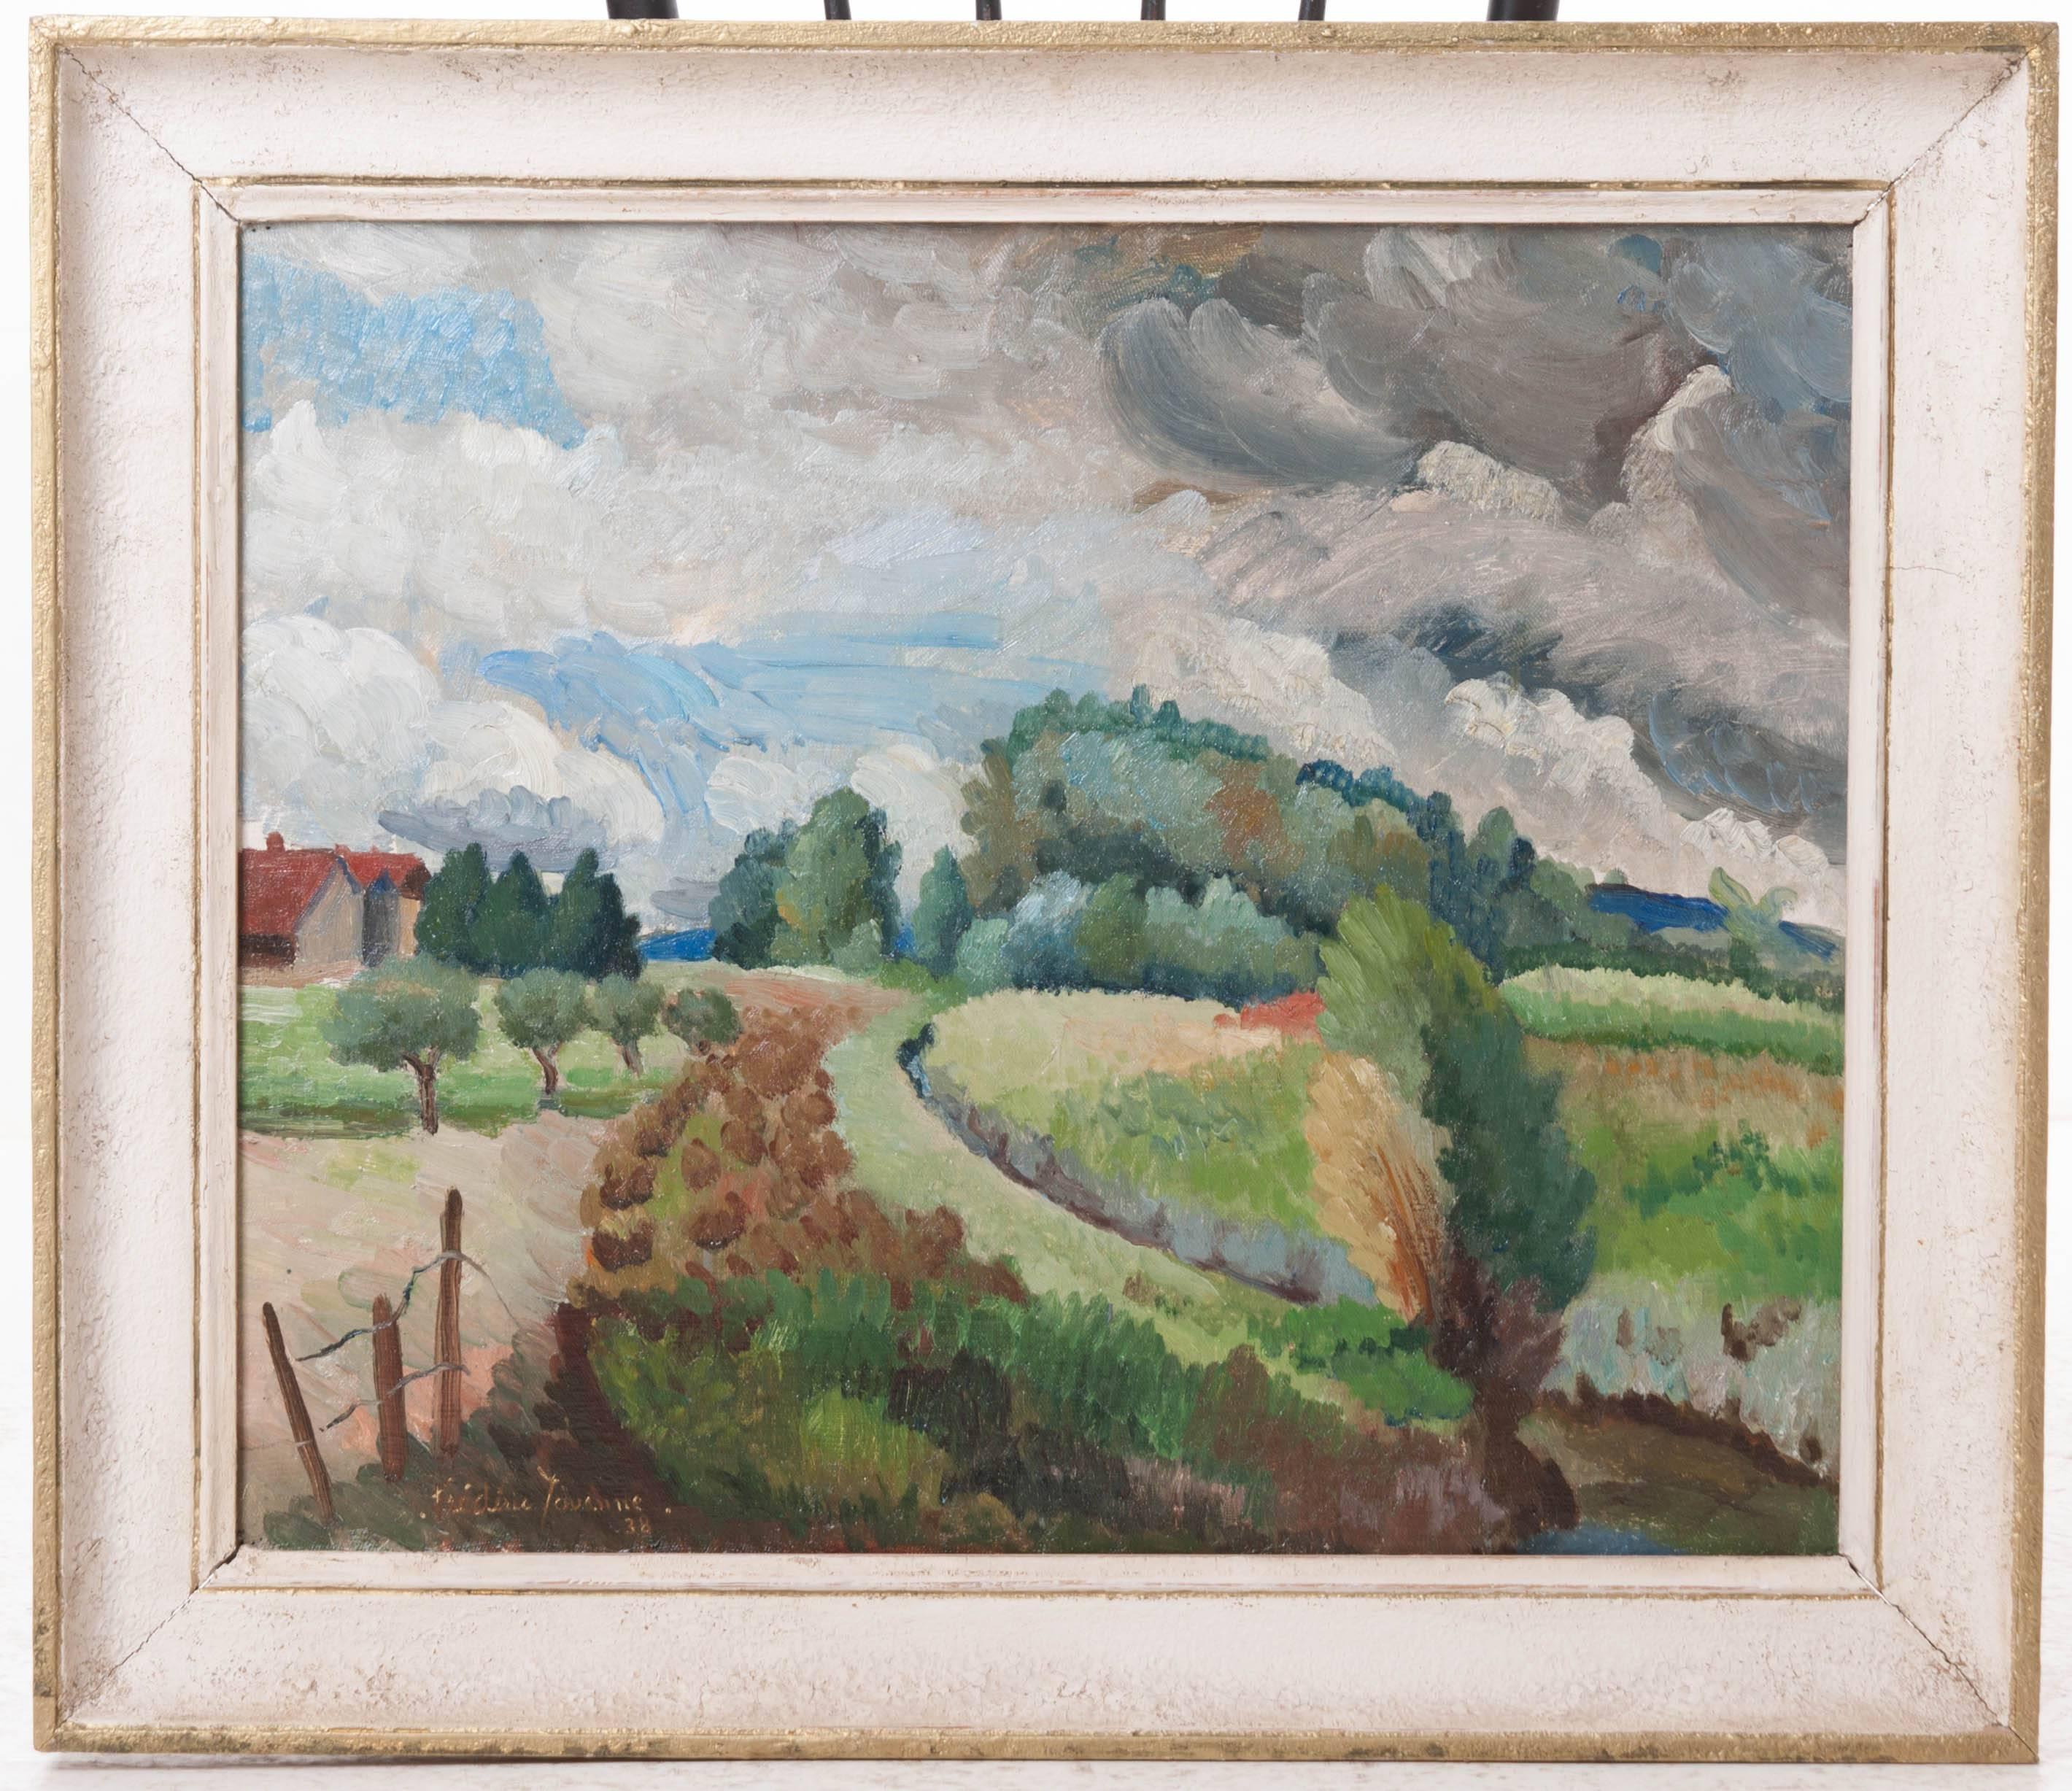 Oil on canvas. Exceptional landscape of life in the French countryside. Vivid colors and deliberate brush strokes marry to create the illusion of movement. Frame is painted in an textured, antiqued white with gold trim. Signed by the artist in '38.